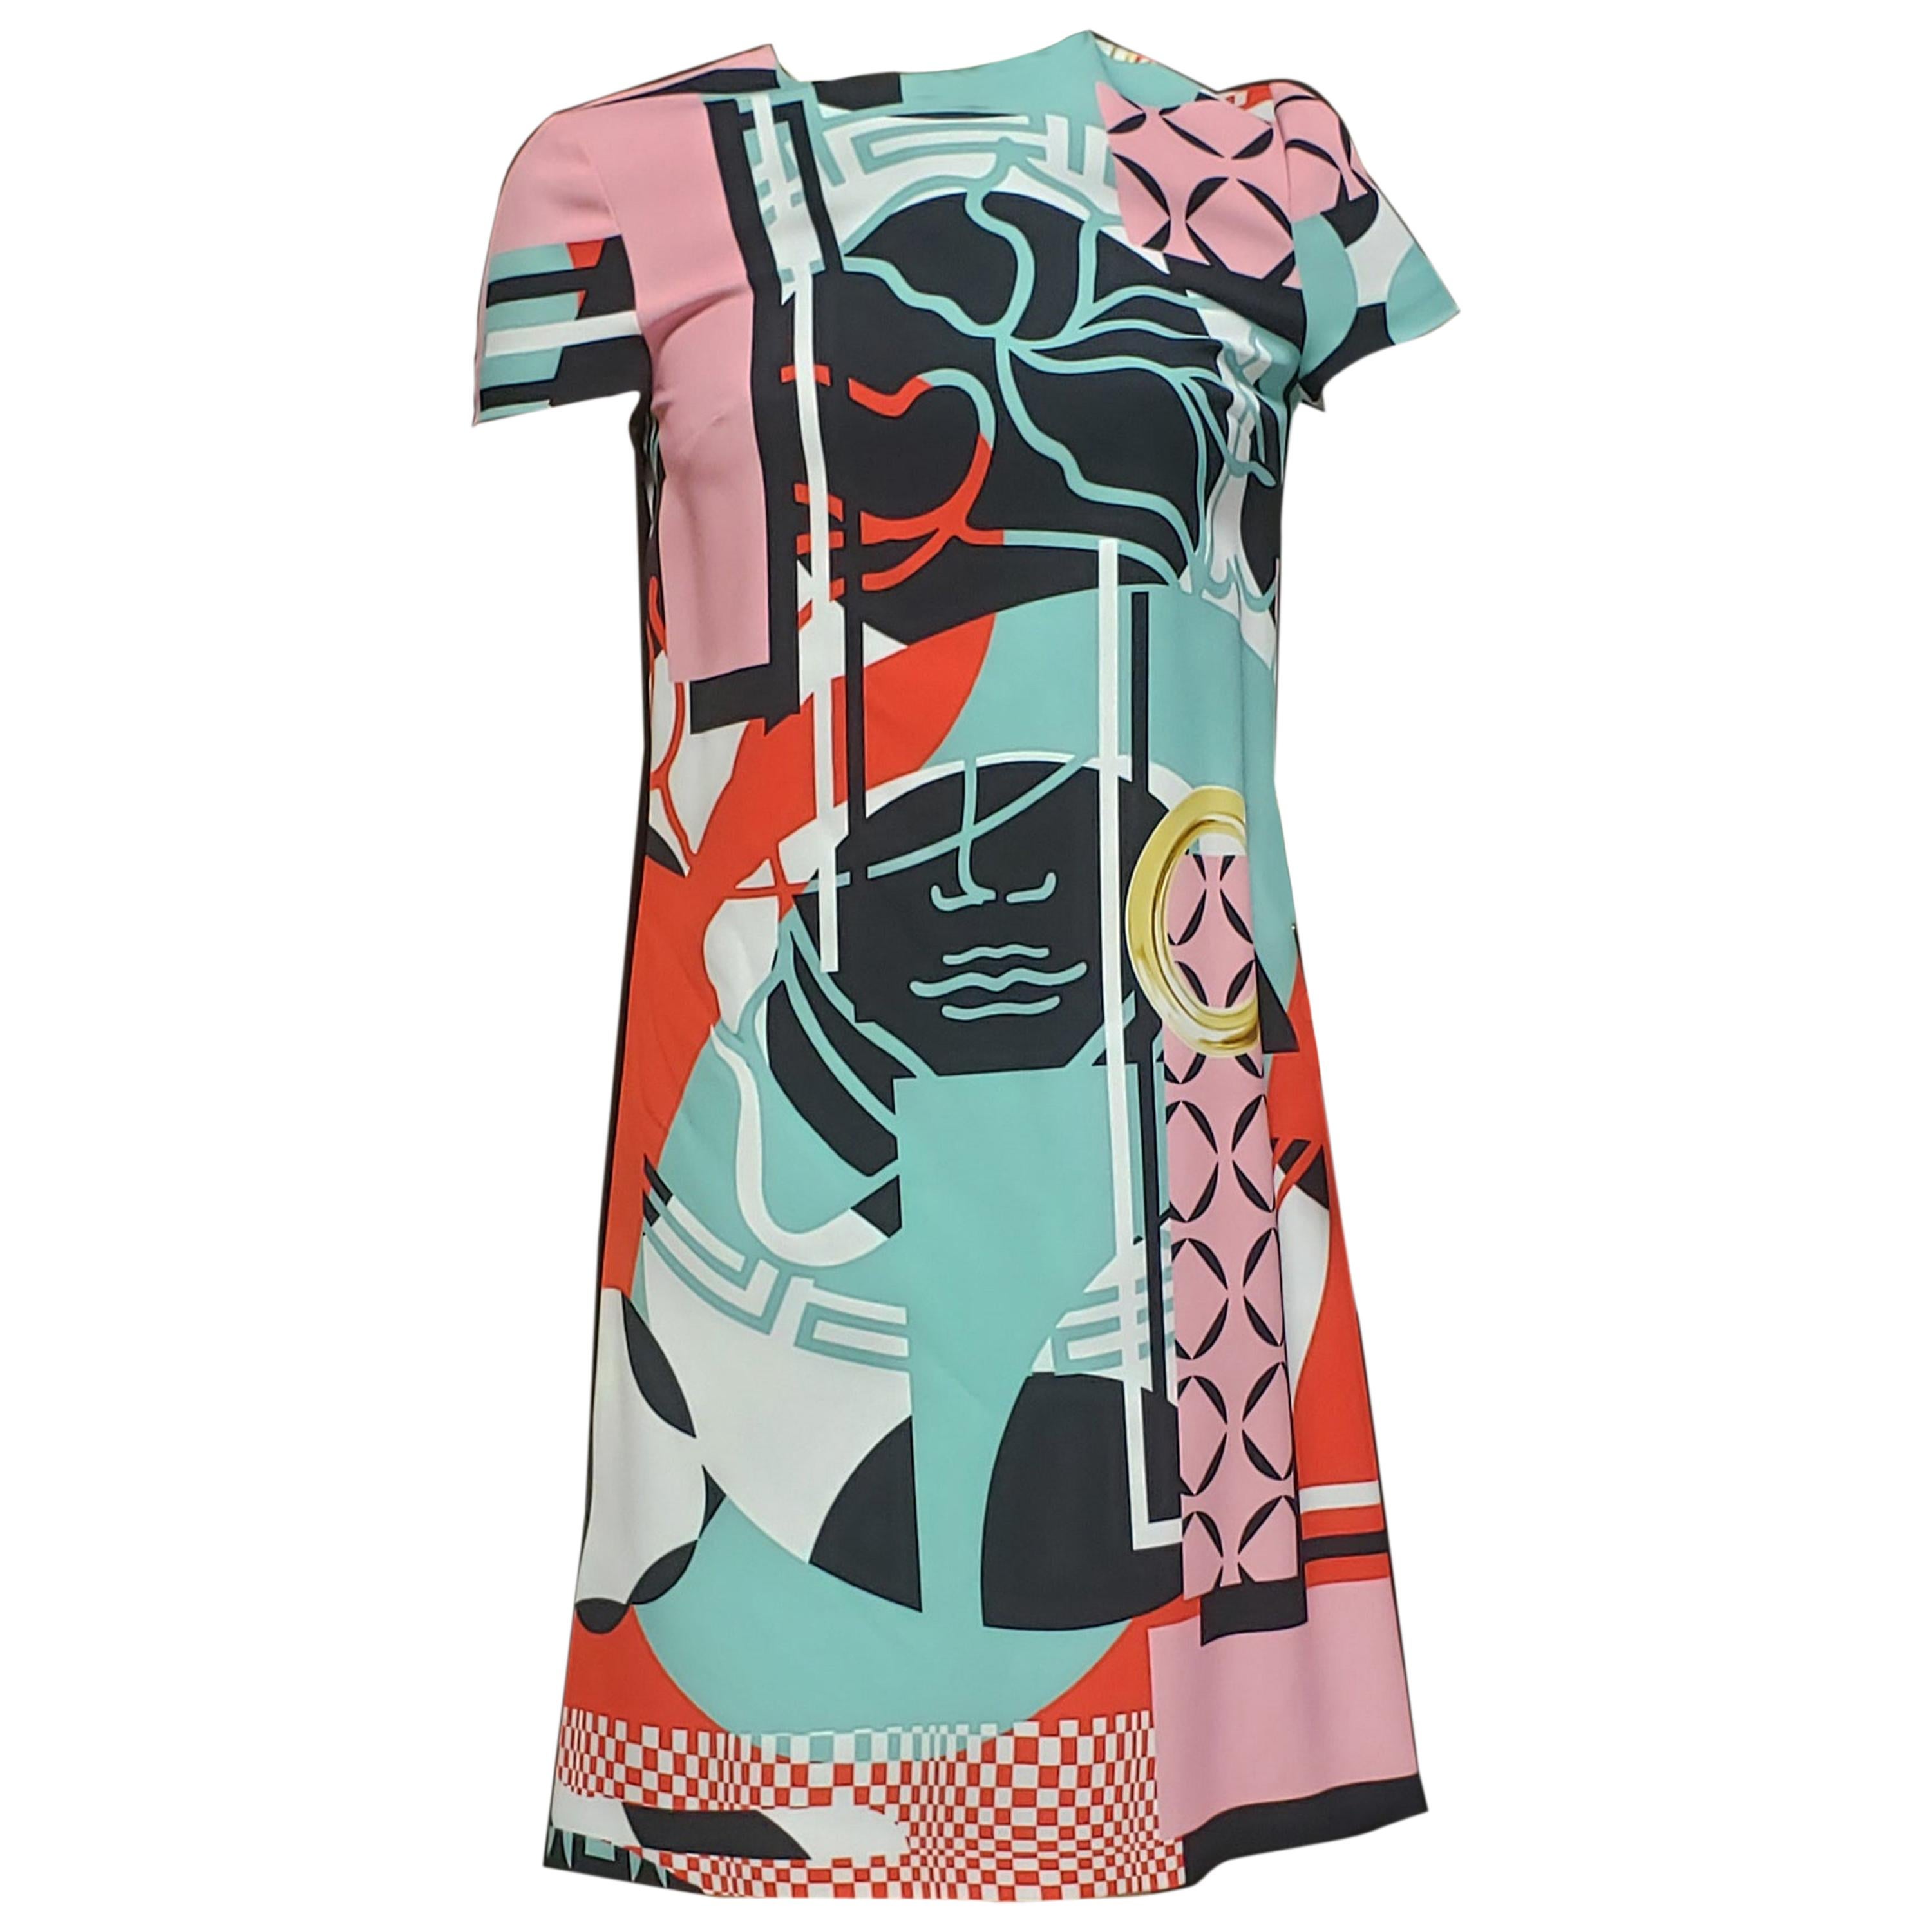 S/2015 NEW VERSACE ABSTRACT PRINT "STAINED GLASS WINDOW" Dress 38 - 4 For Sale